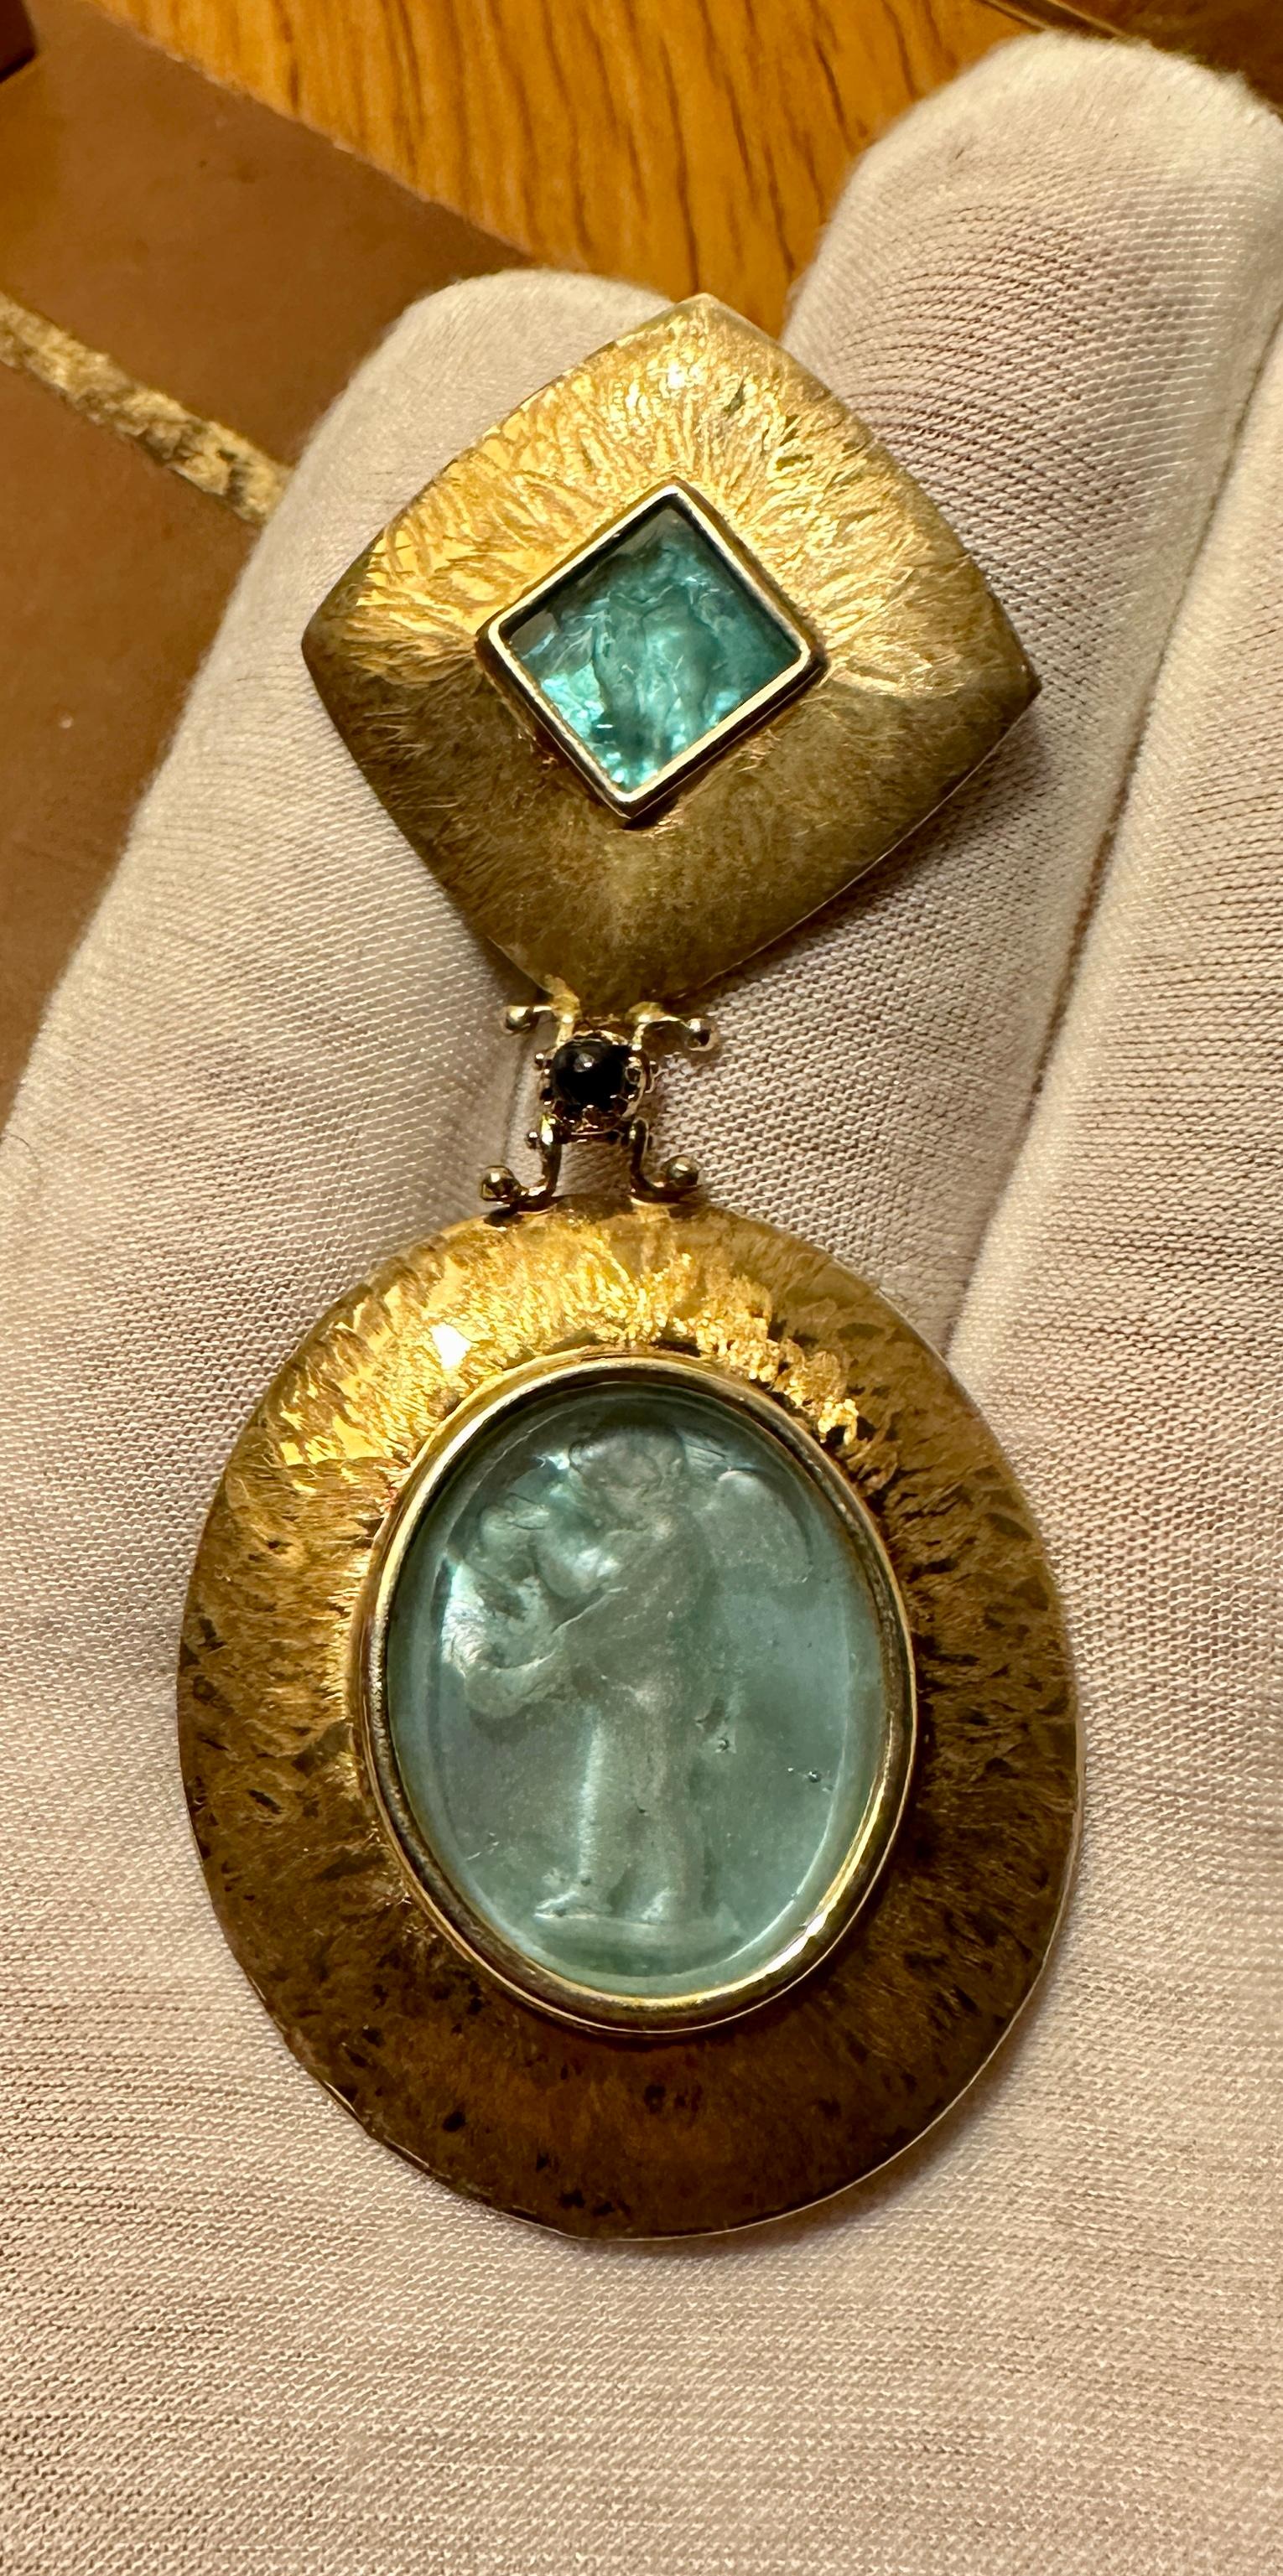 Indulge in this magnificent Cherub Intaglio Pendant in 14 Karat Yellow Gold and Topaz.  The exquisite Venetian Glass Intaglios are in the perfect Sea Foam Blue - Green color.  The double intaglios are set in gorgeous 14 Karat Gold.  The pendant is a